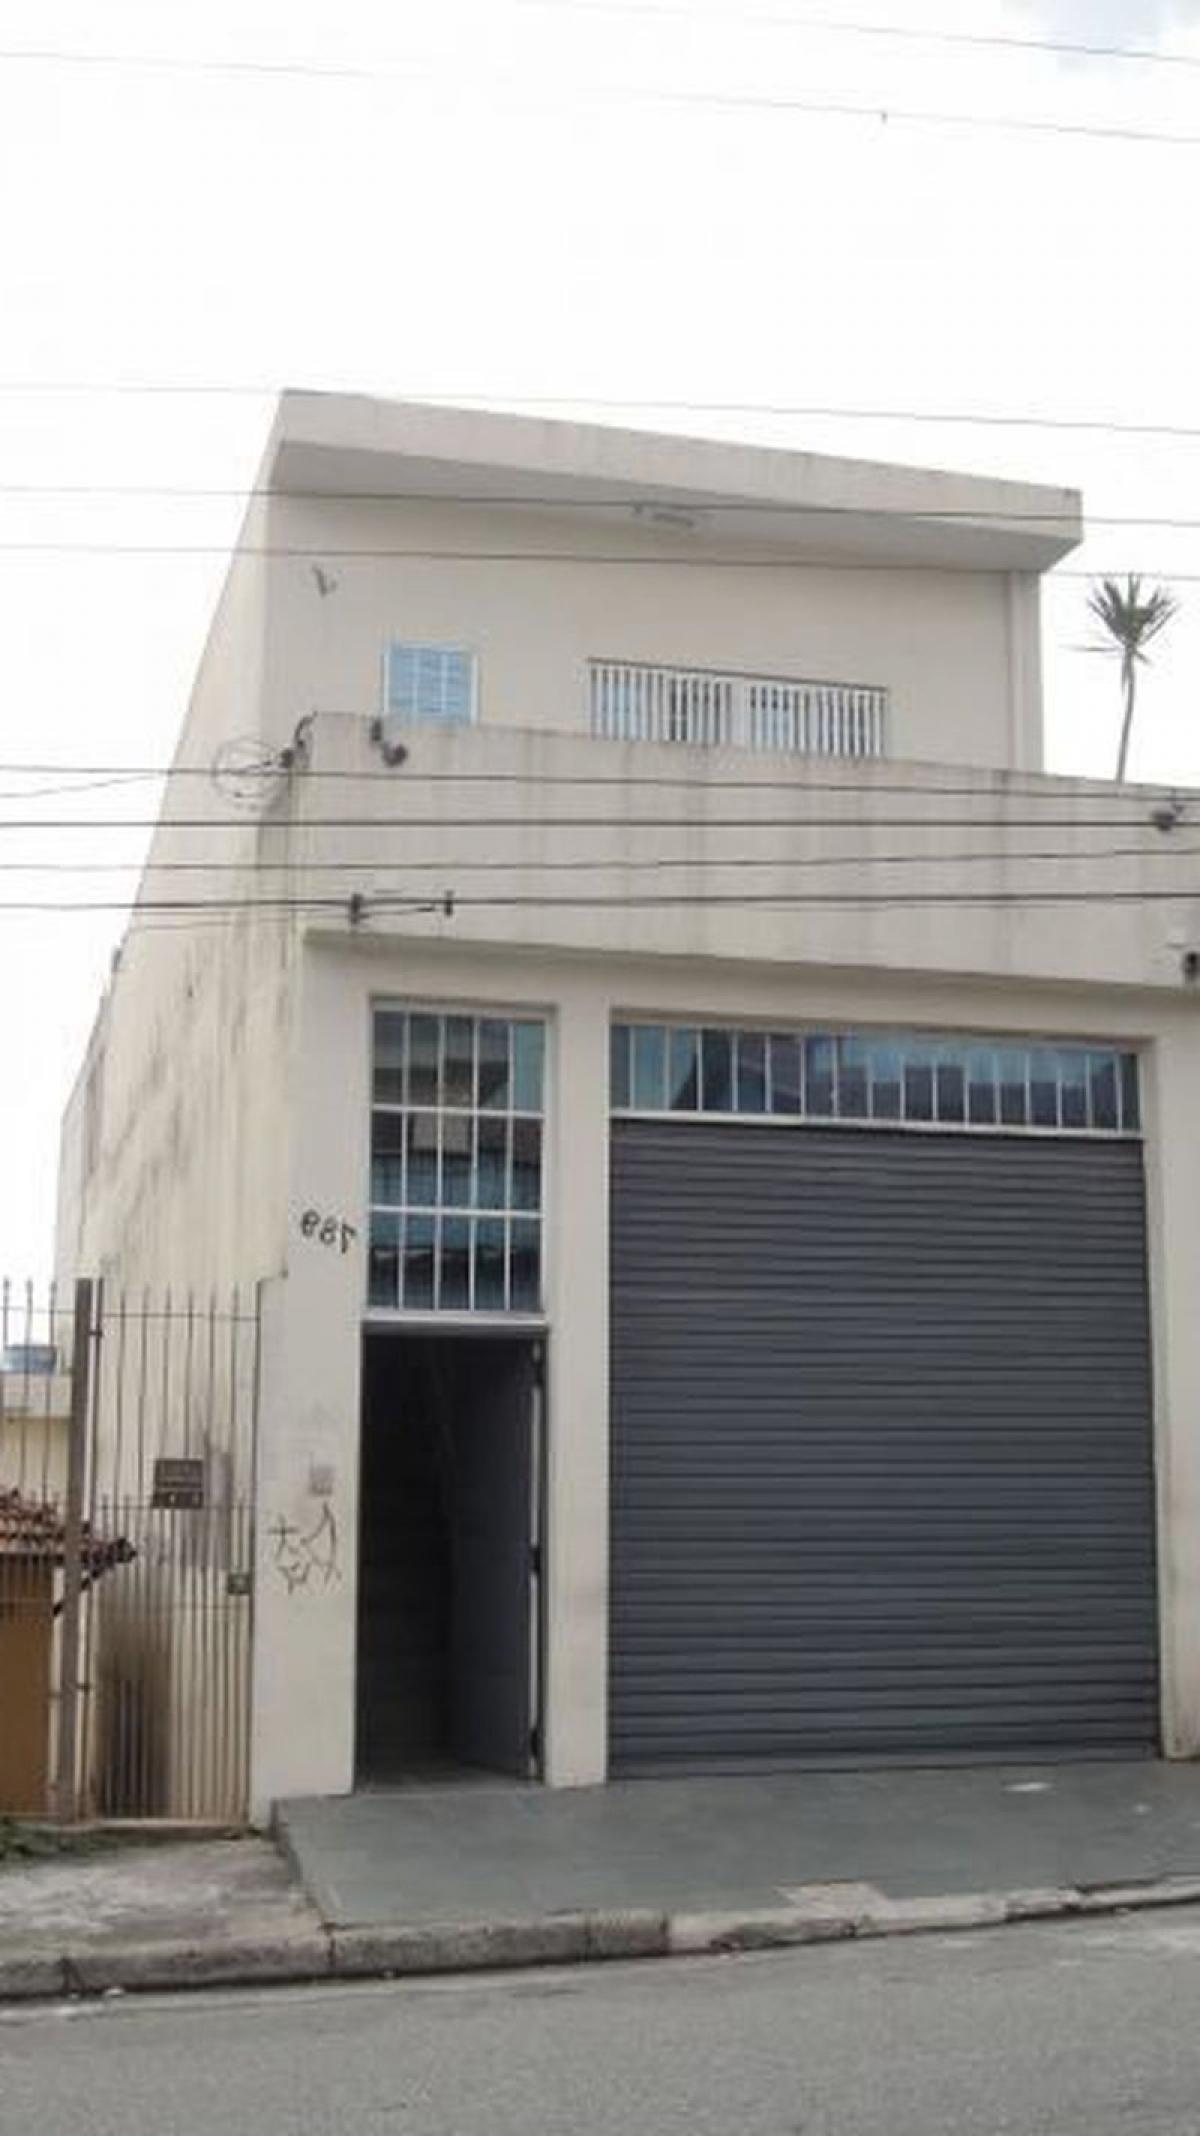 Picture of Commercial Building For Sale in Itapetininga, Sao Paulo, Brazil